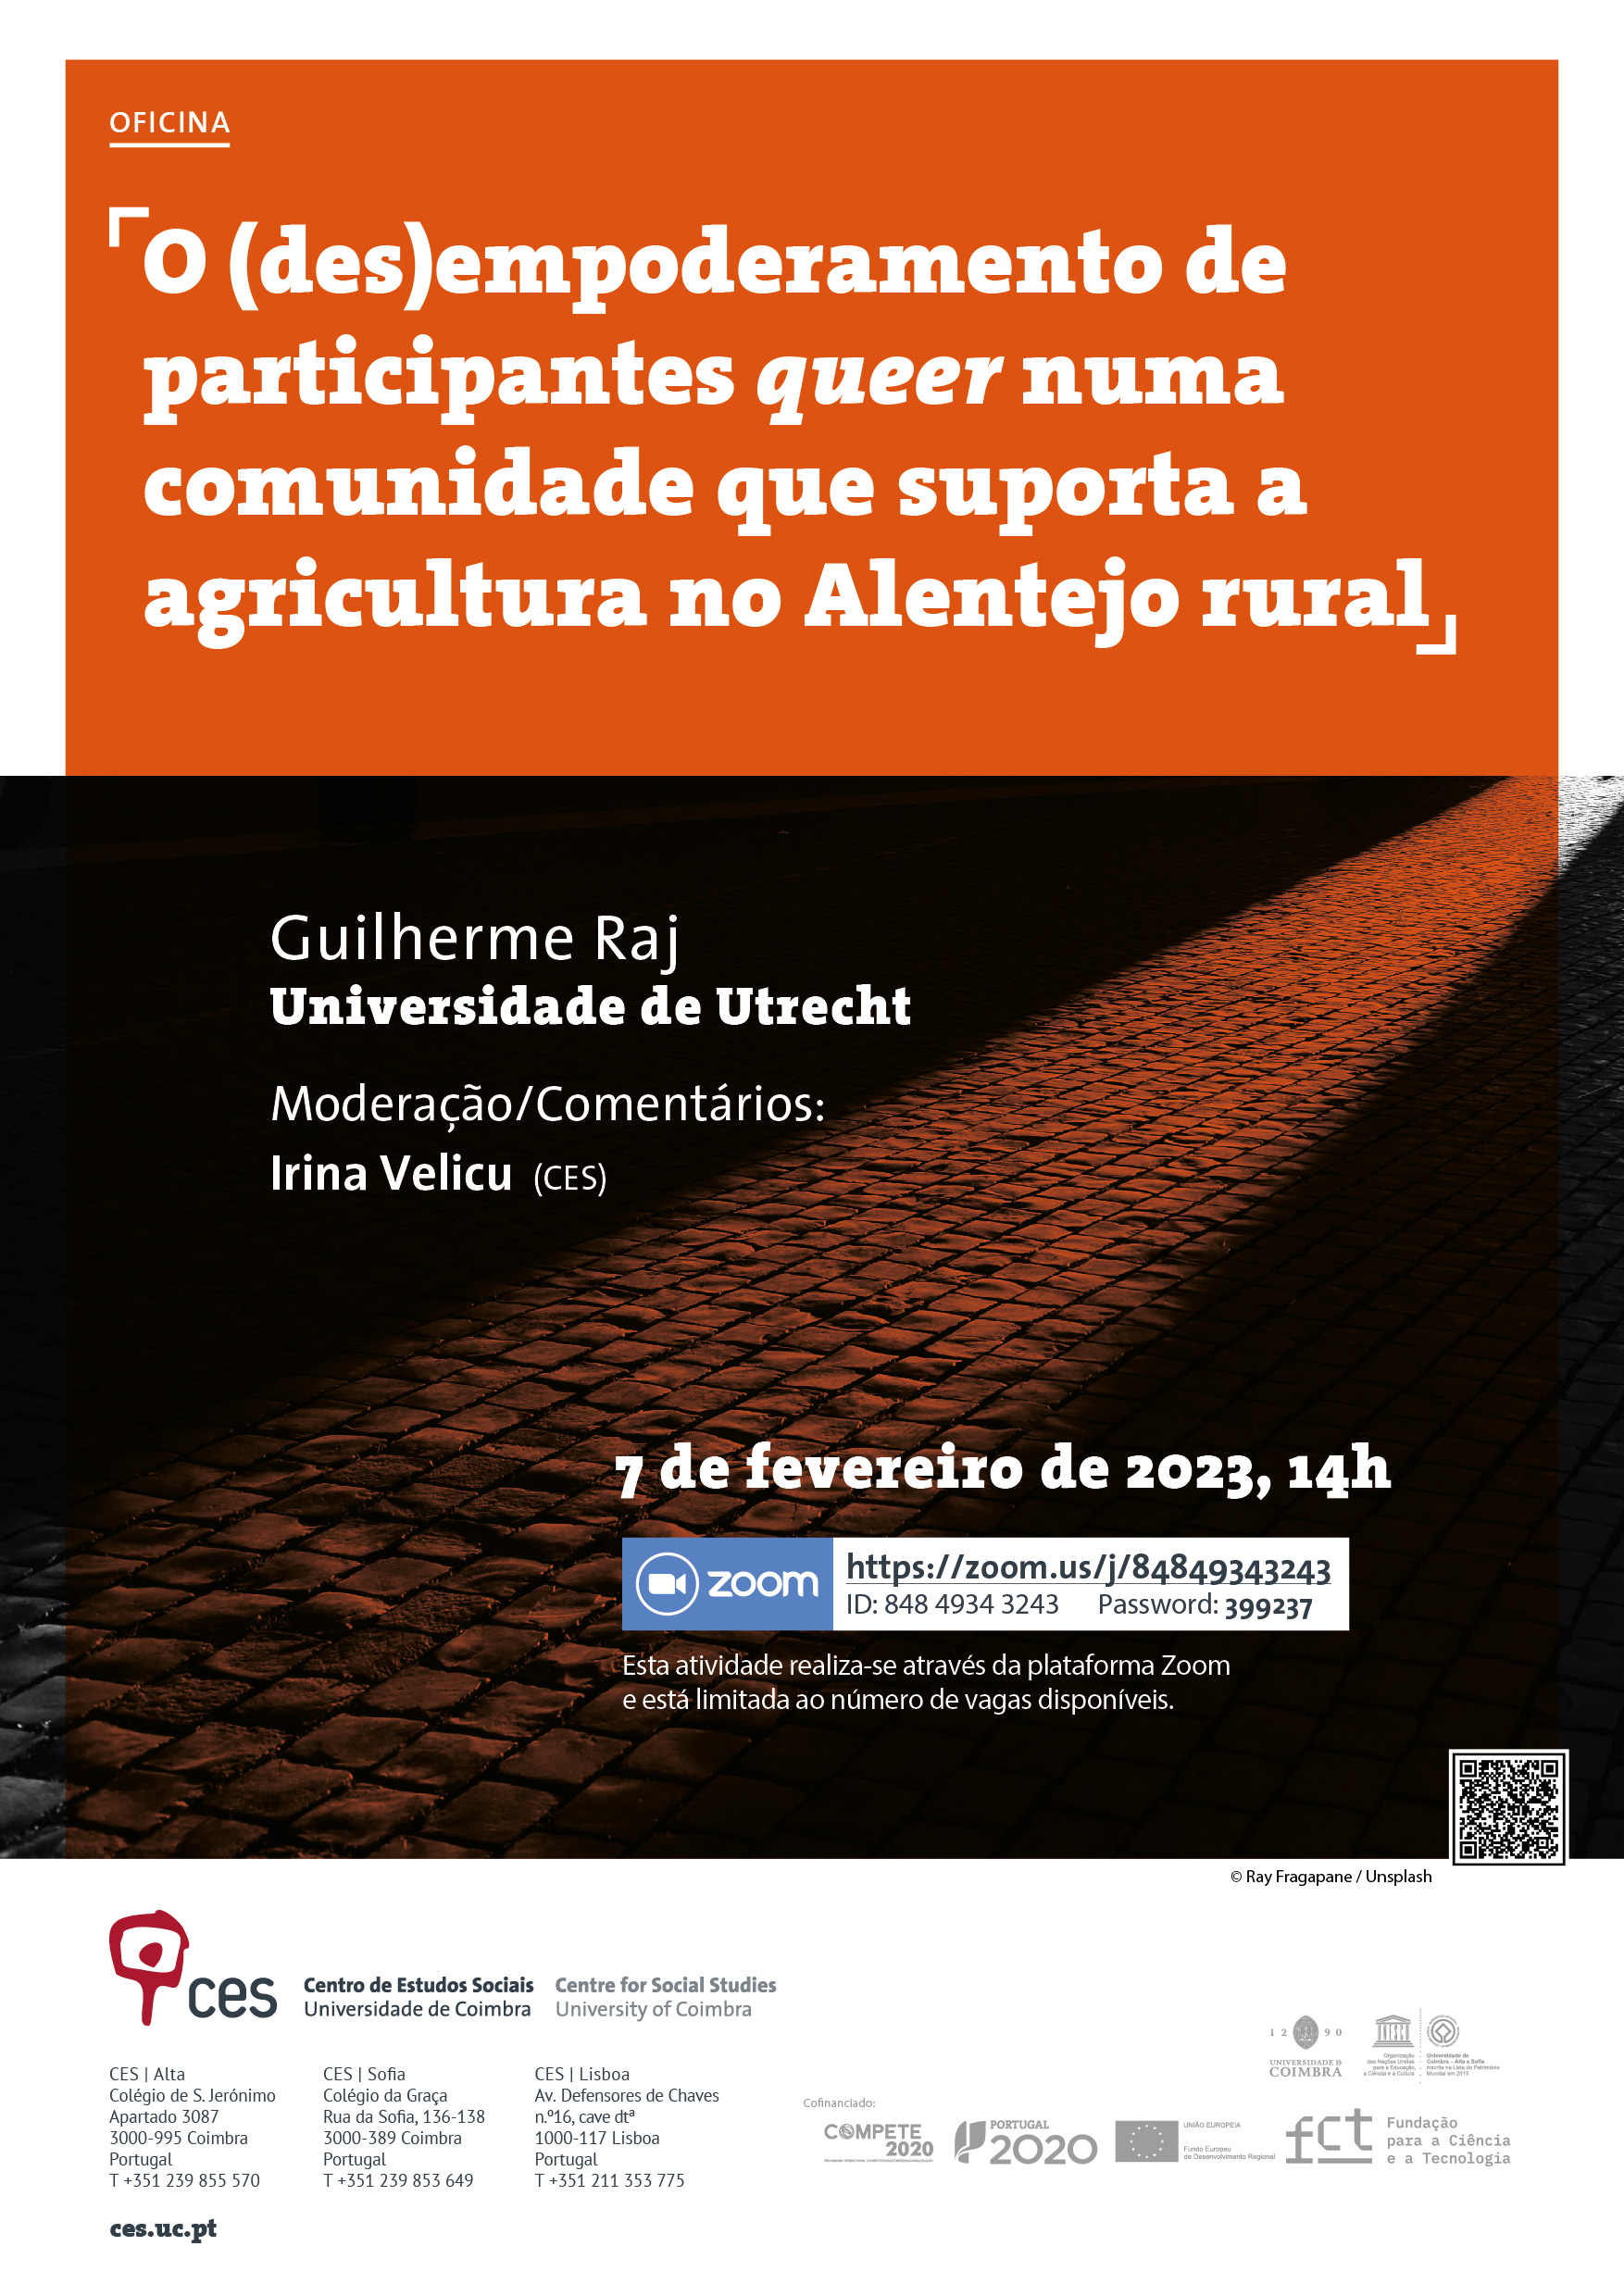 The (dis)empowerment of queer participants in a community supporting agriculture in rural Alentejo<span id="edit_41518"><script>$(function() { $('#edit_41518').load( "/myces/user/editobj.php?tipo=evento&id=41518" ); });</script></span>